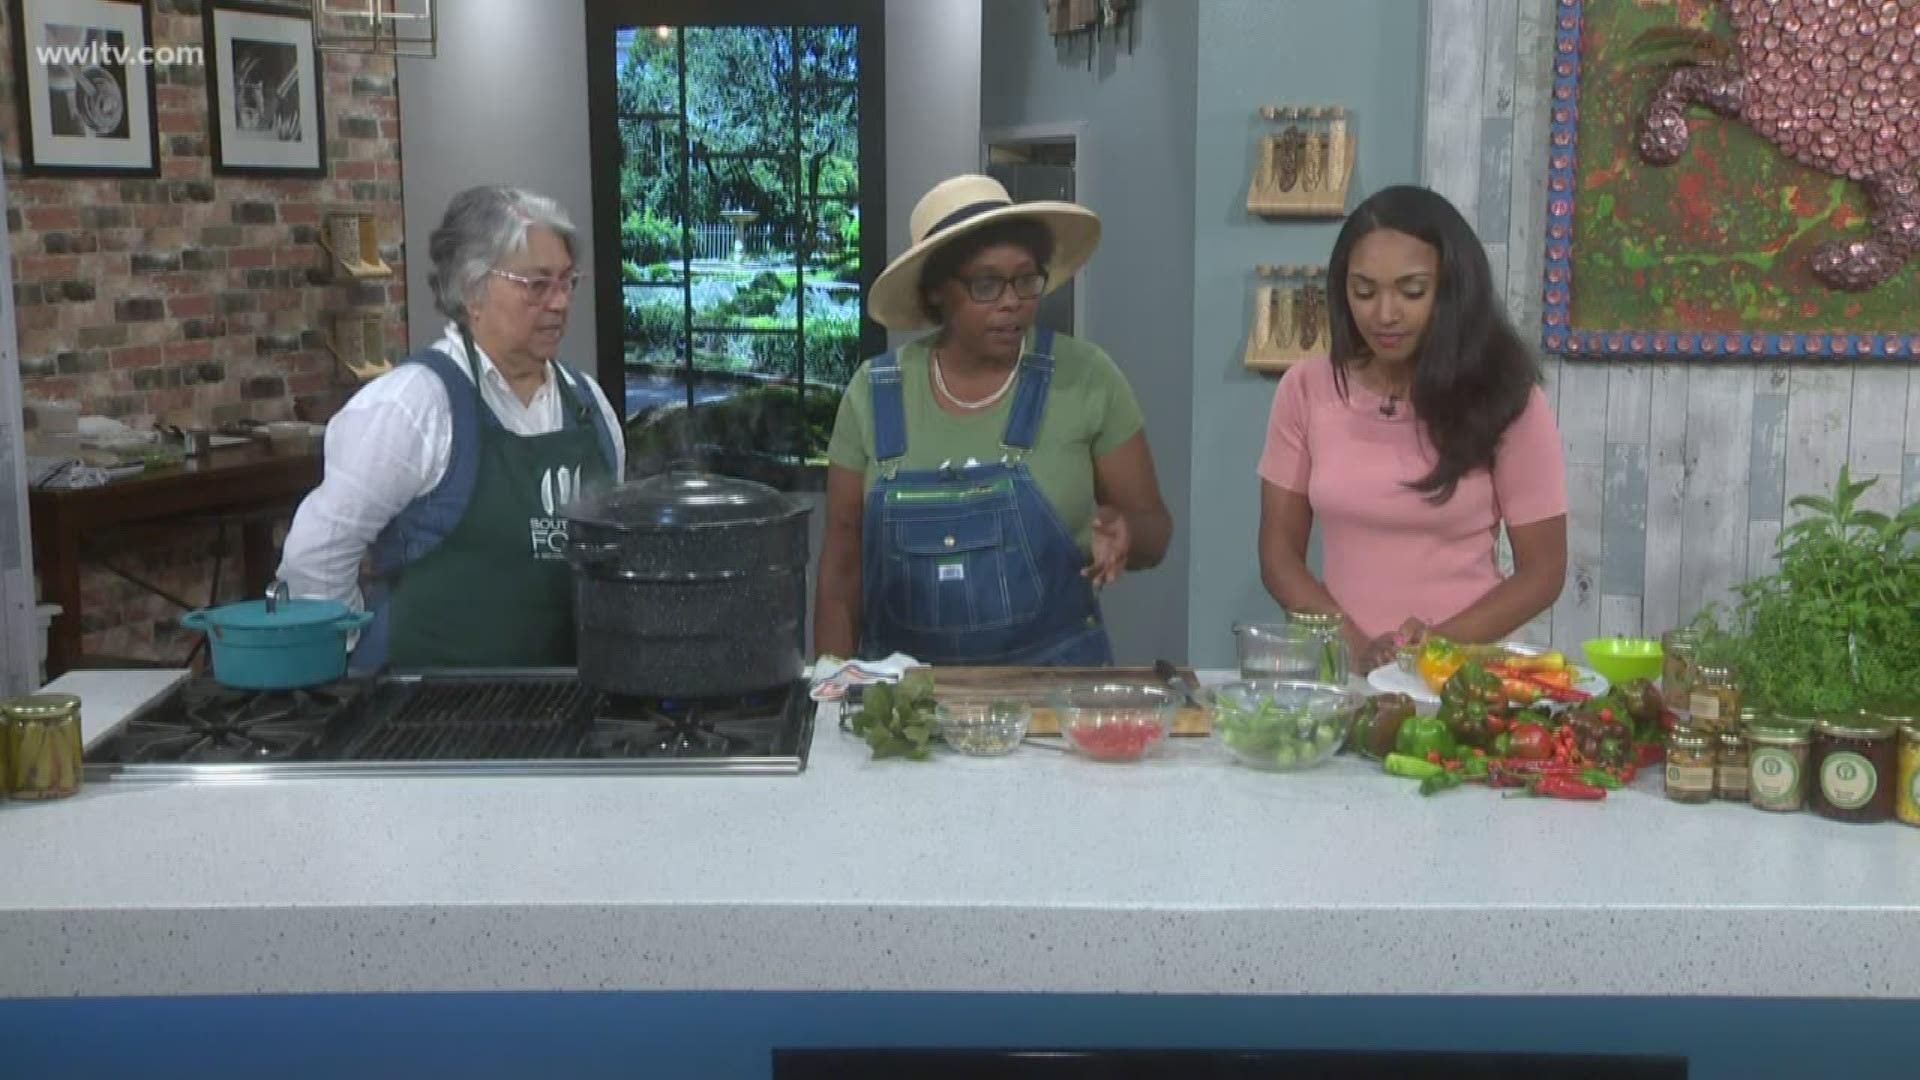 What can you do with that bounty of fruits and vegetables from your garden or your neighbor's garden?  You can make pickles and enjoy that bounty out of season.  We are joined in the kitchen today by Ica Crawford of GroNola (gronola.net) and Liz Williams of the Southern Food & Beverage Museum.